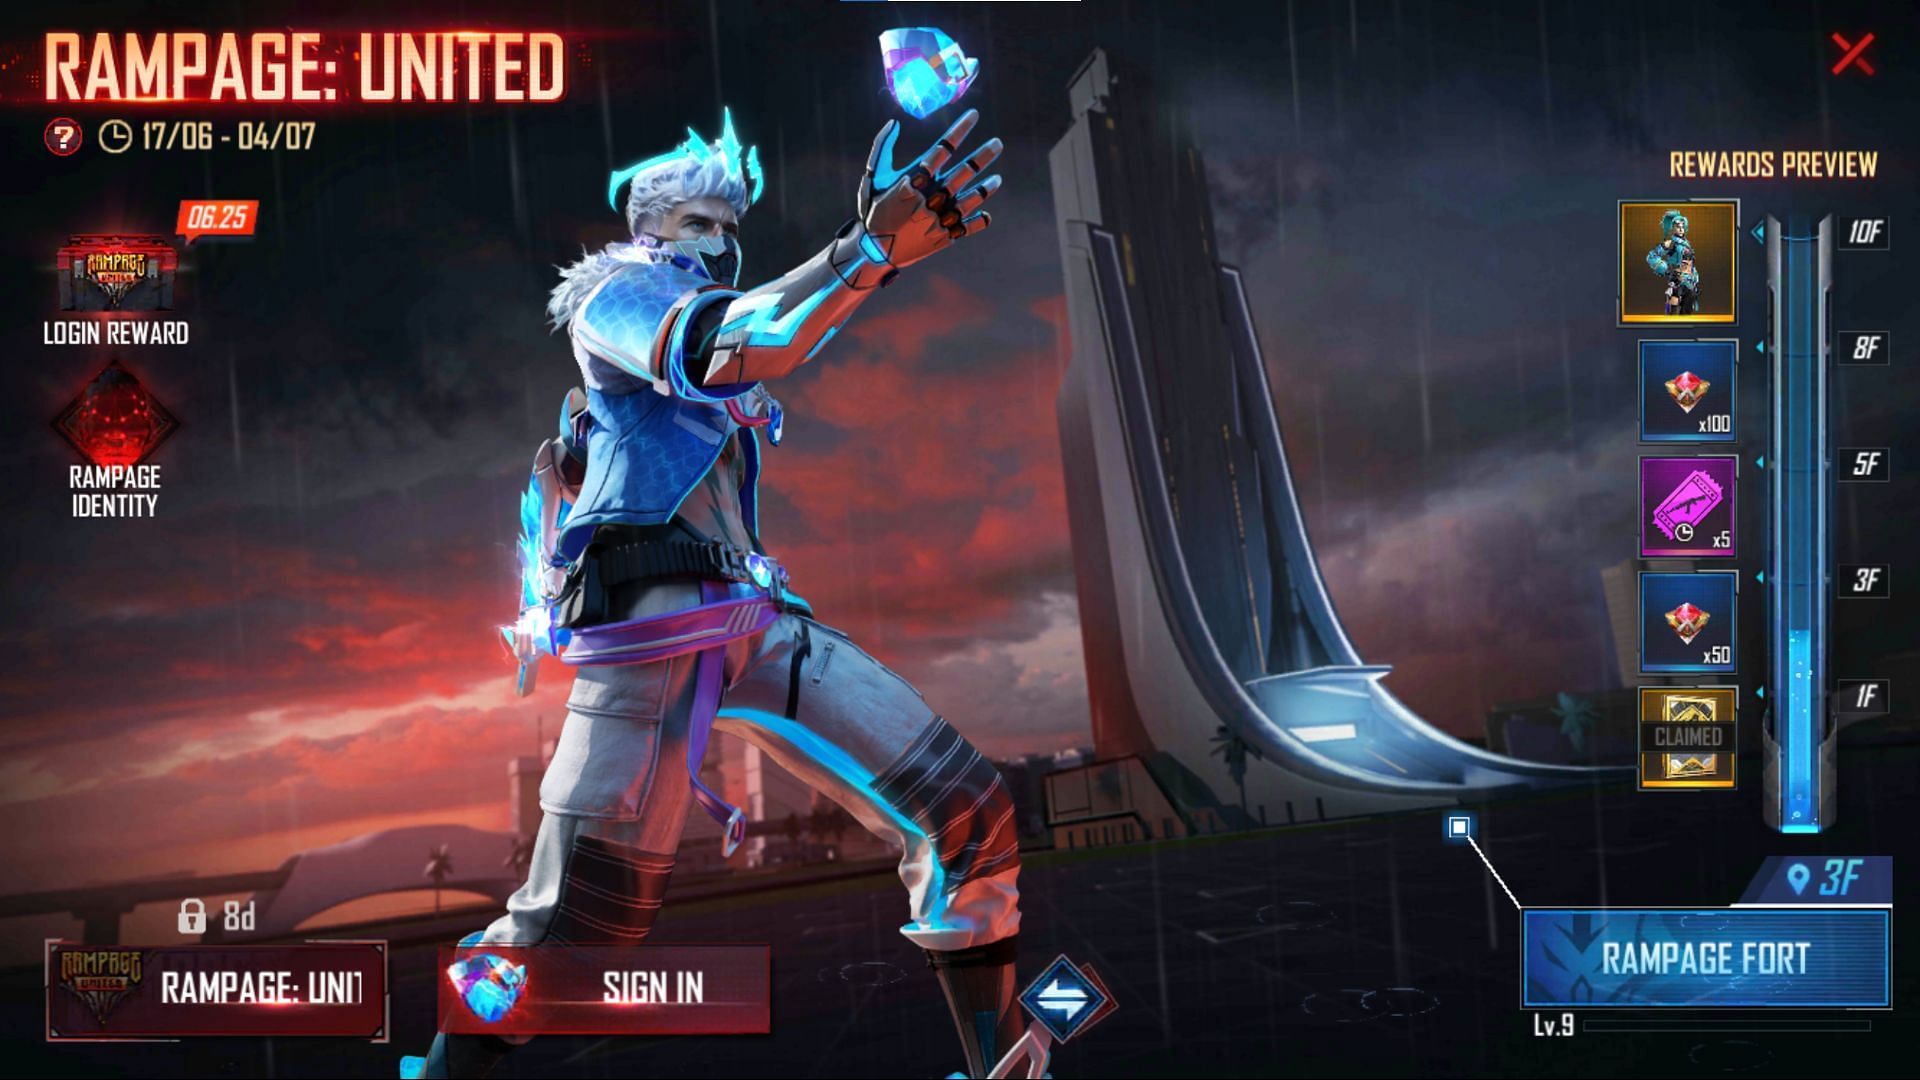 After reaching floor 10, the bundle will be rewarded (Image via Garena)